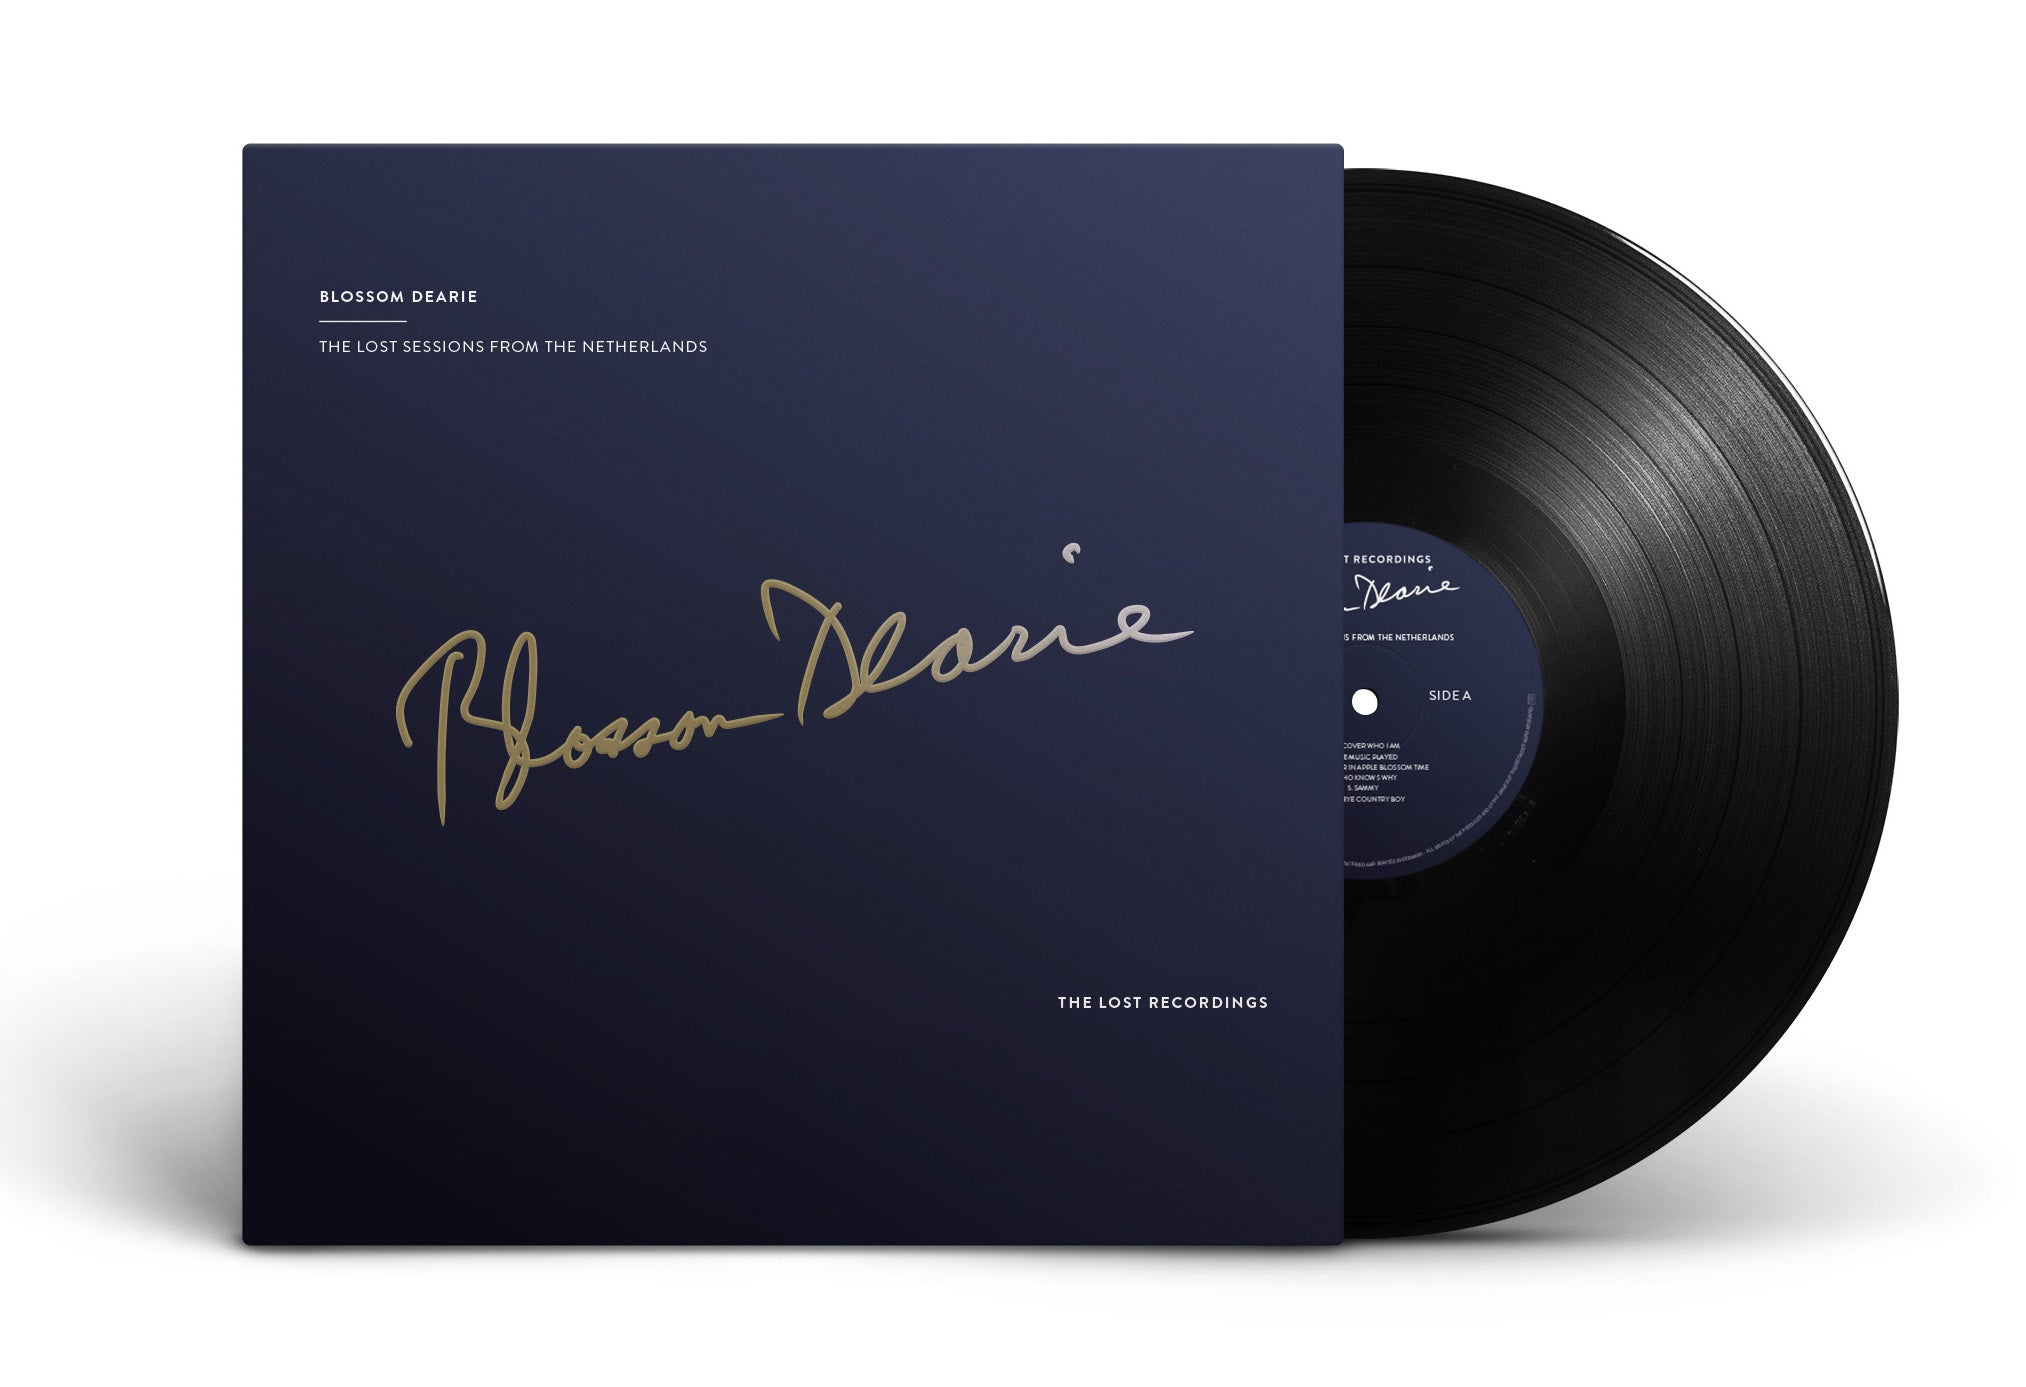 BLOSSOM DEARIE - THE LOST SESSIONS FROM THE NETHERLANDS - VINYL